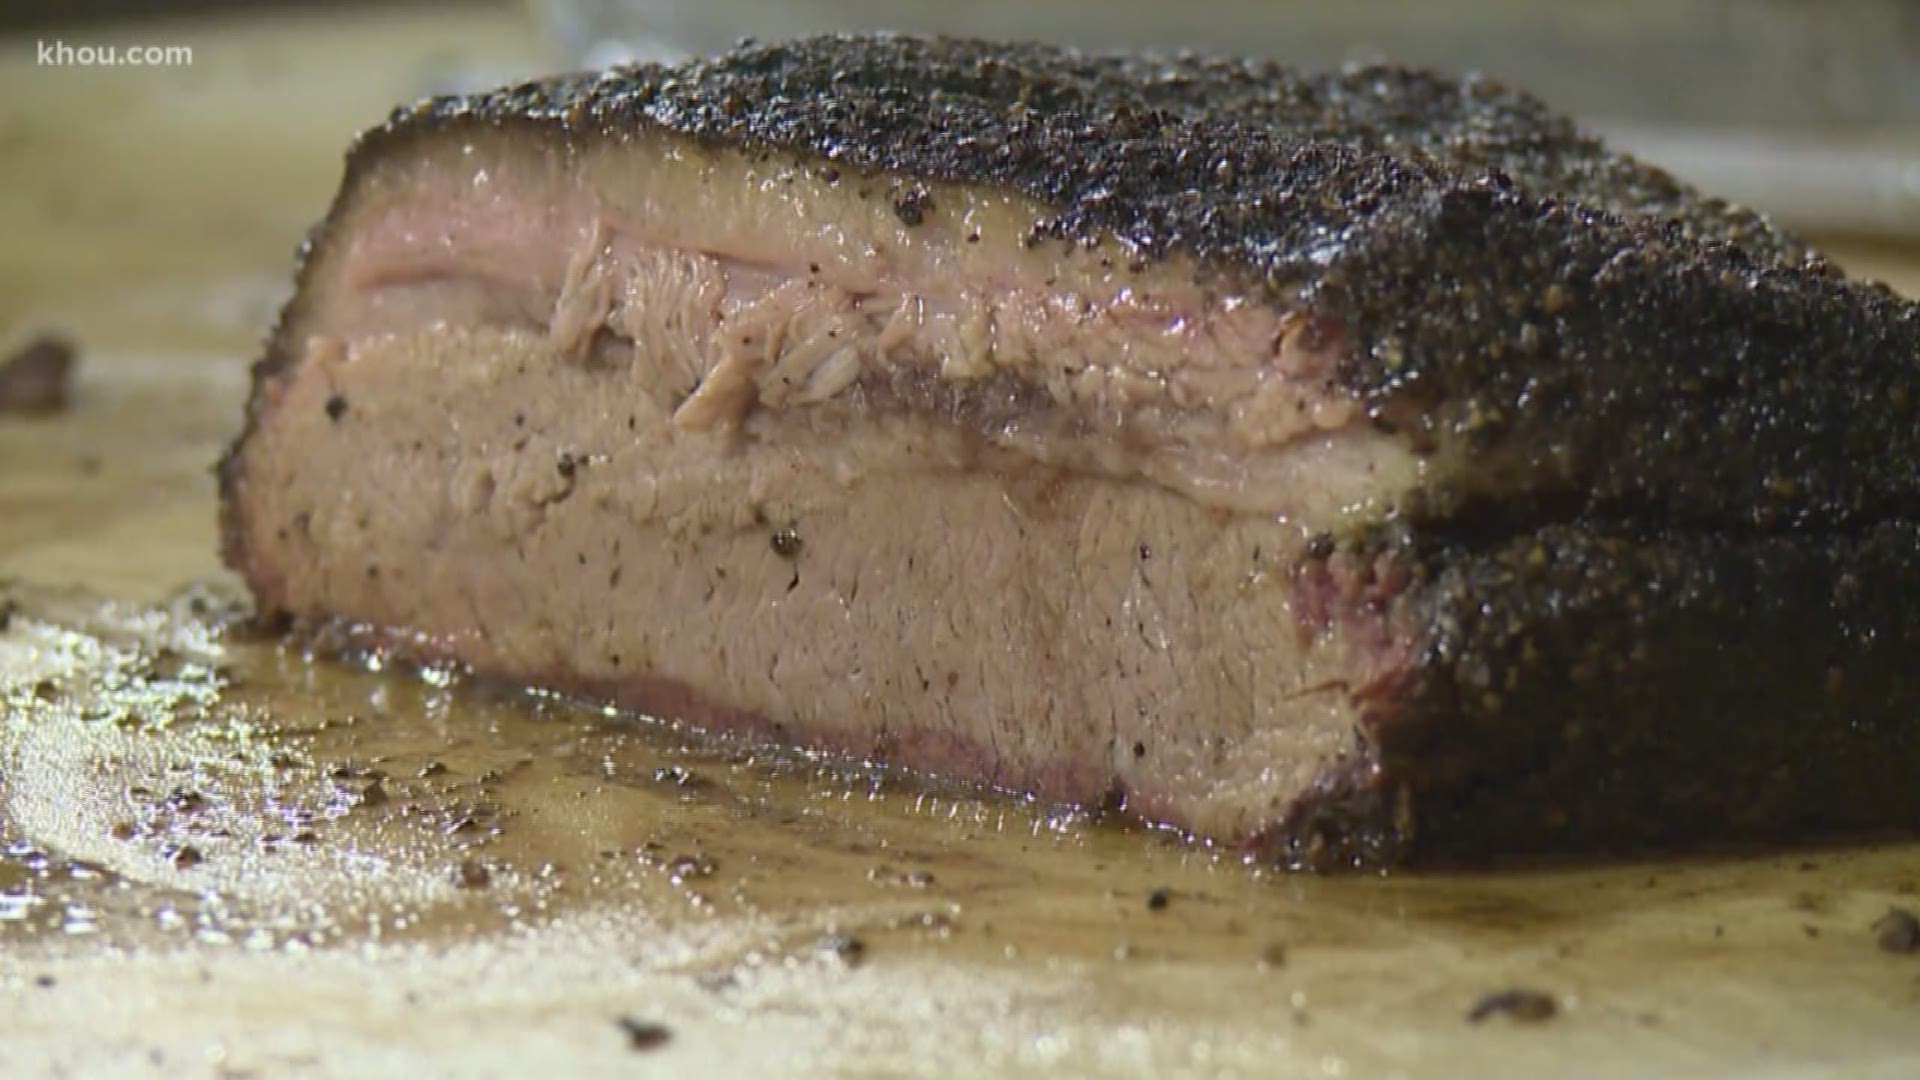 We know Texas loves barbecue, but the price of brisket is skyrocketing. Experts say the value of brisket is up nearly 20% from 2018 to 2019.